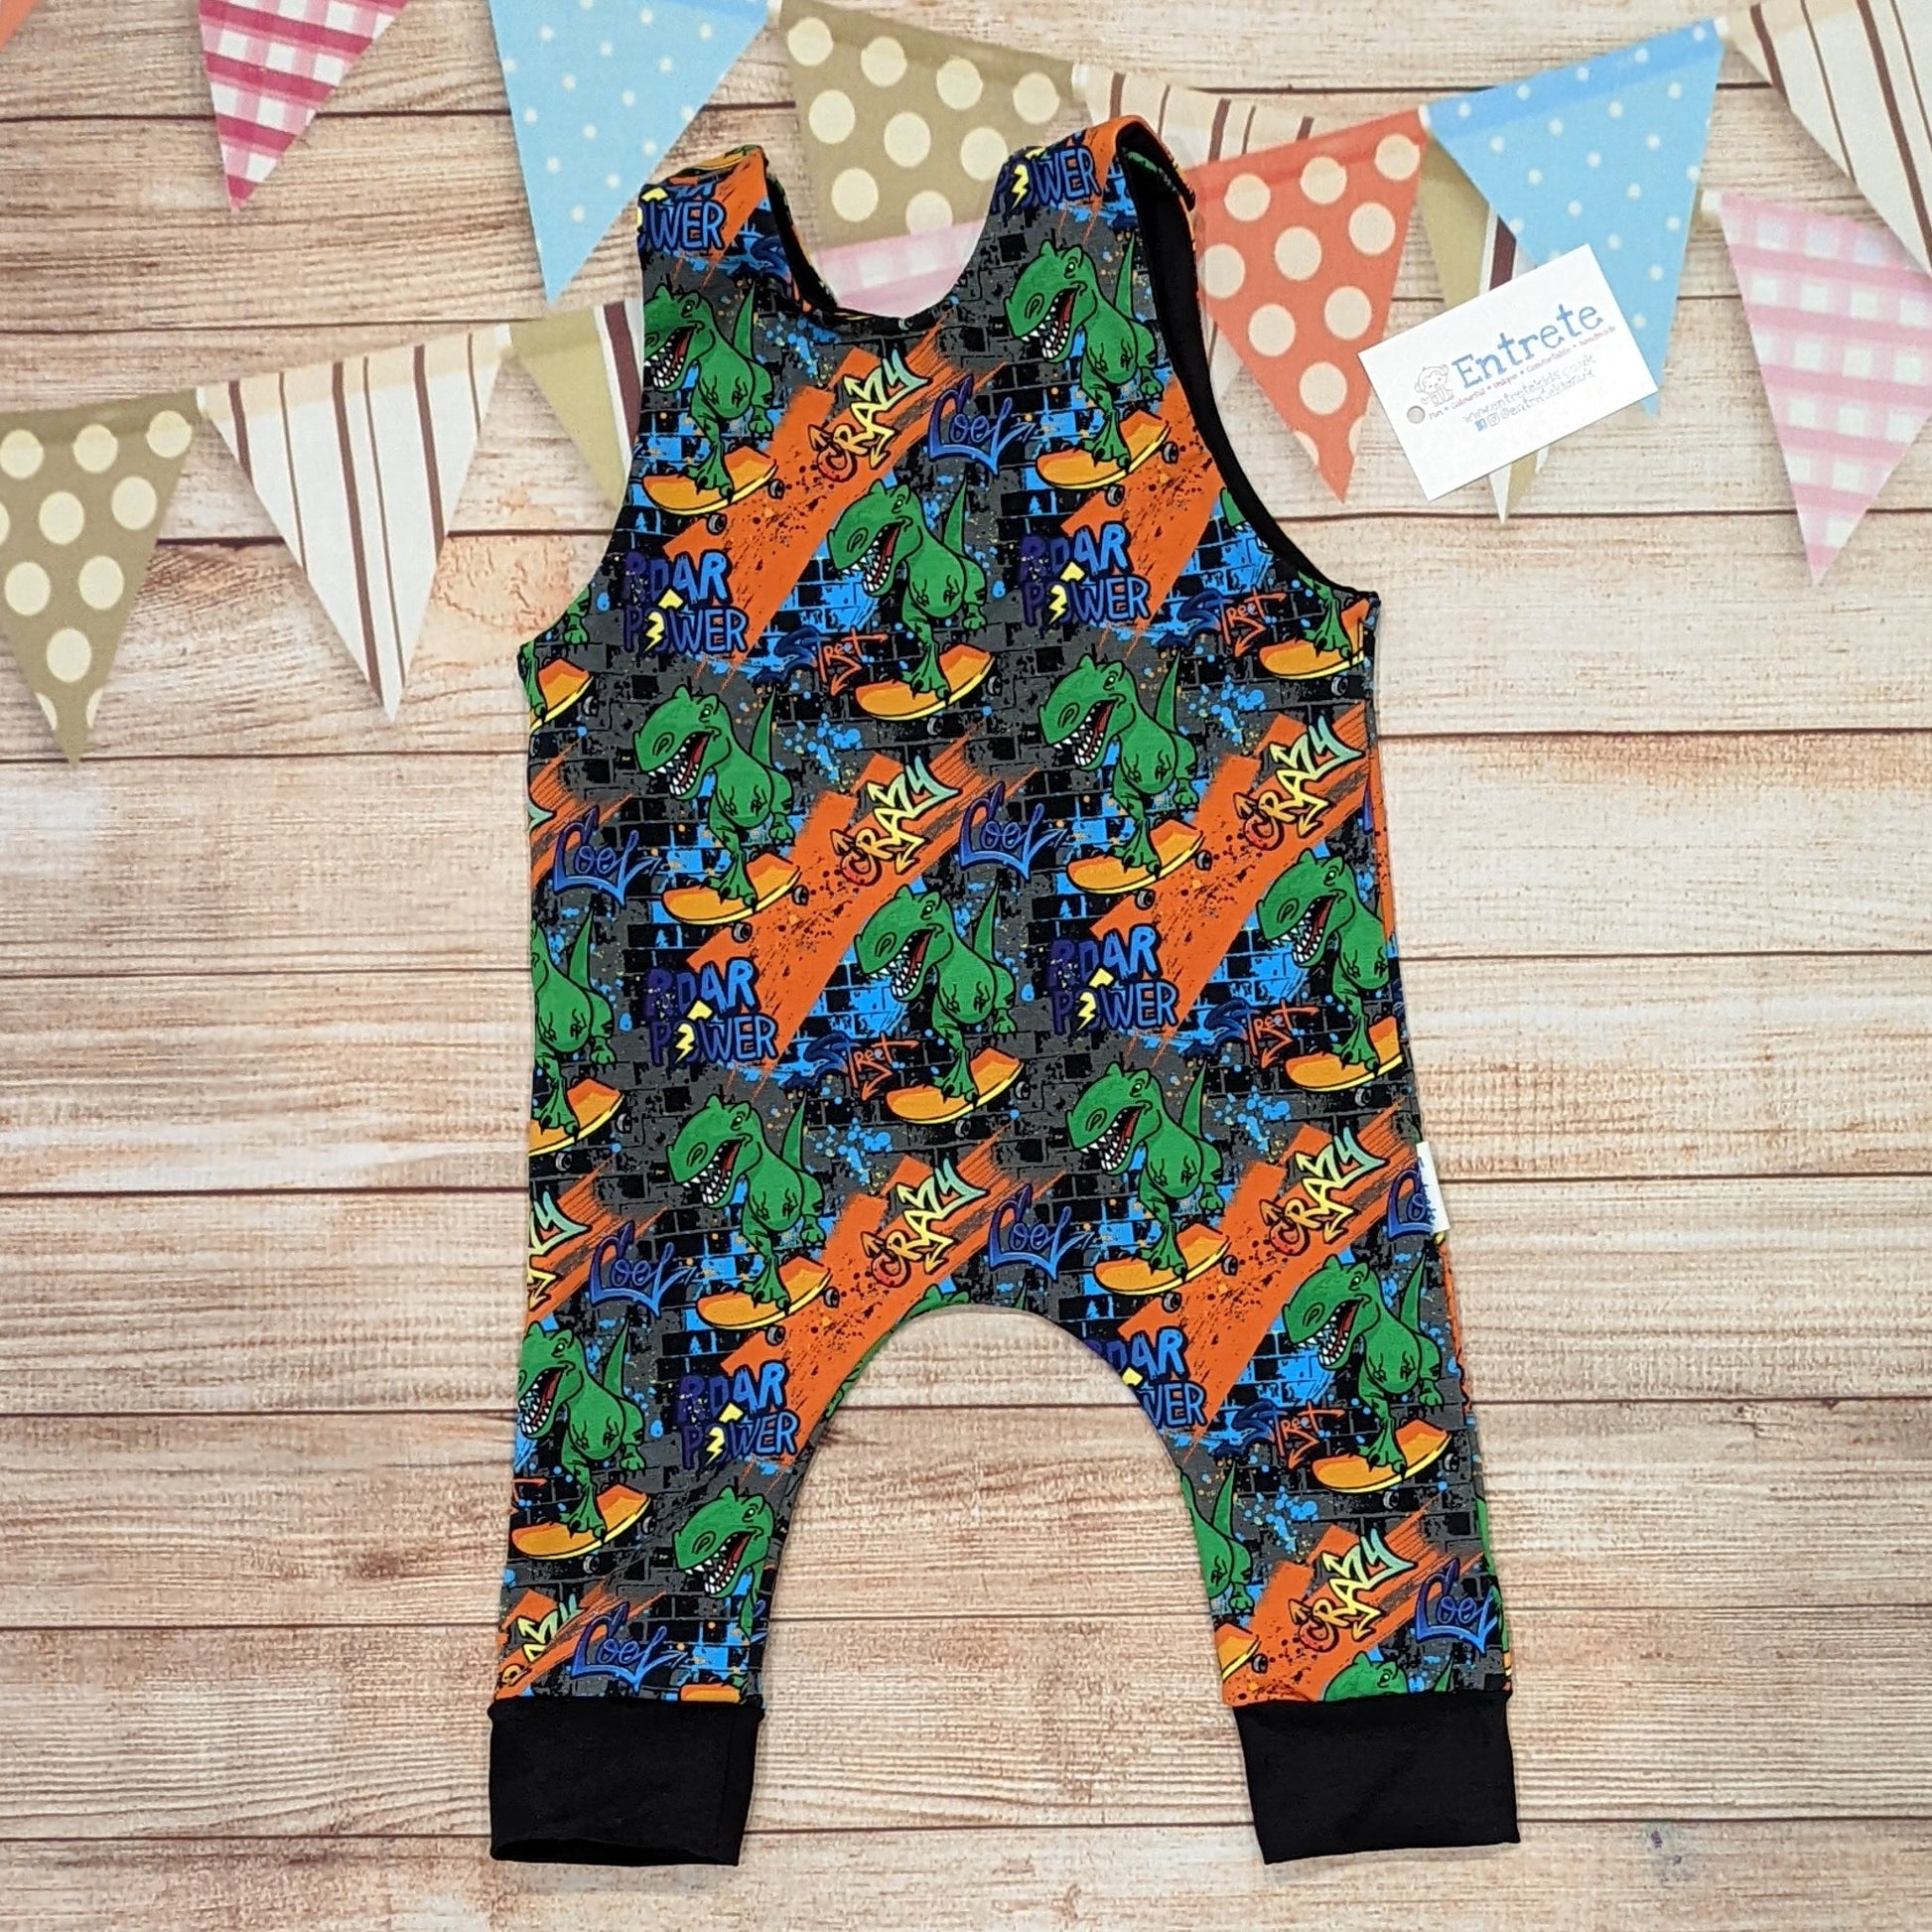 The insanely fun skateboarding dinosaurs romper. Handmade using street dino cotton French terry and black cotton jersey. Shown from the rear.